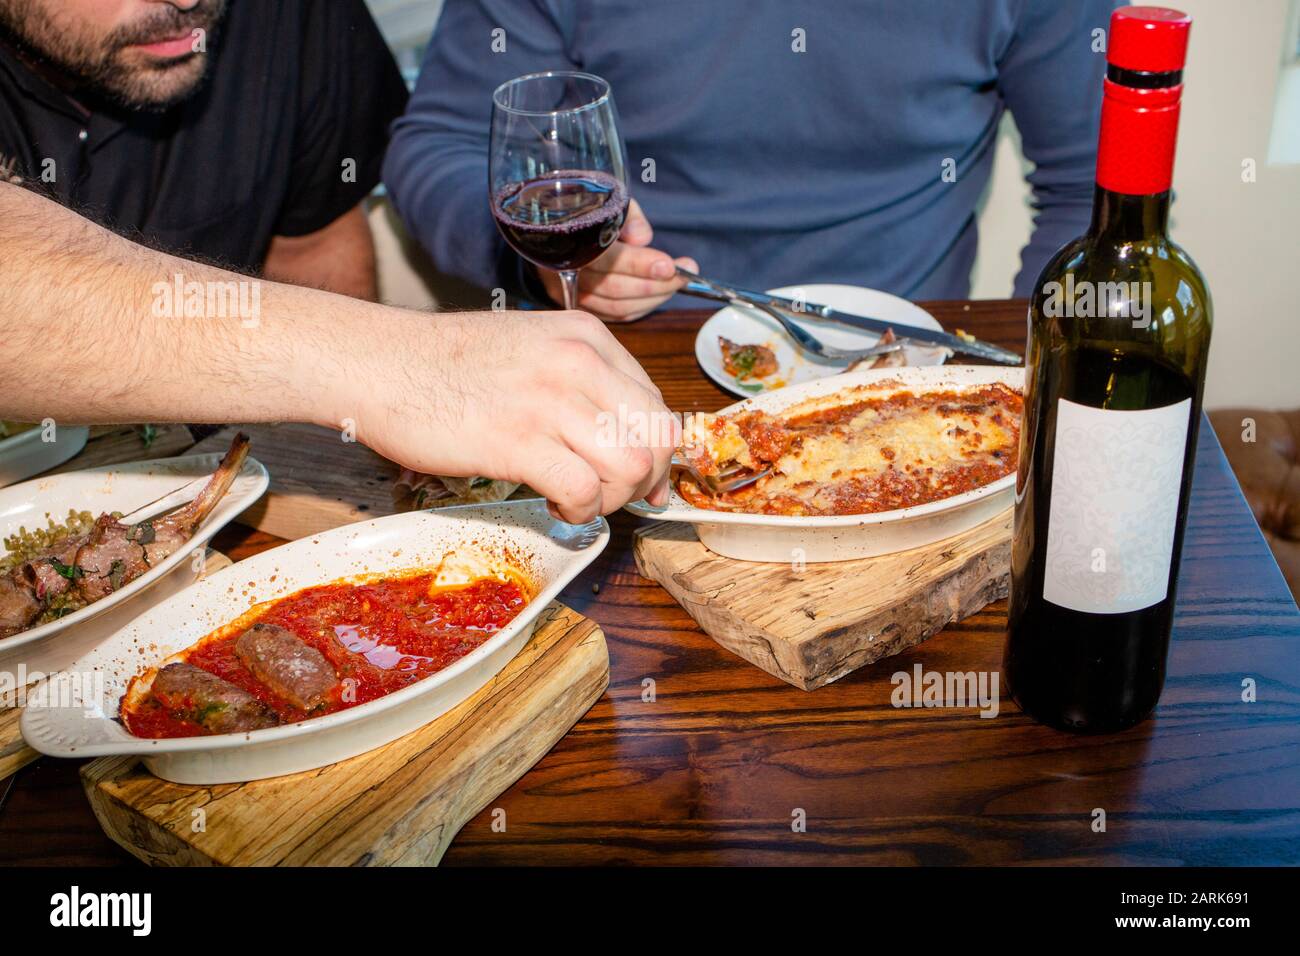 Close-up view of two men sharing a meal together with a bottle of wine Stock Photo